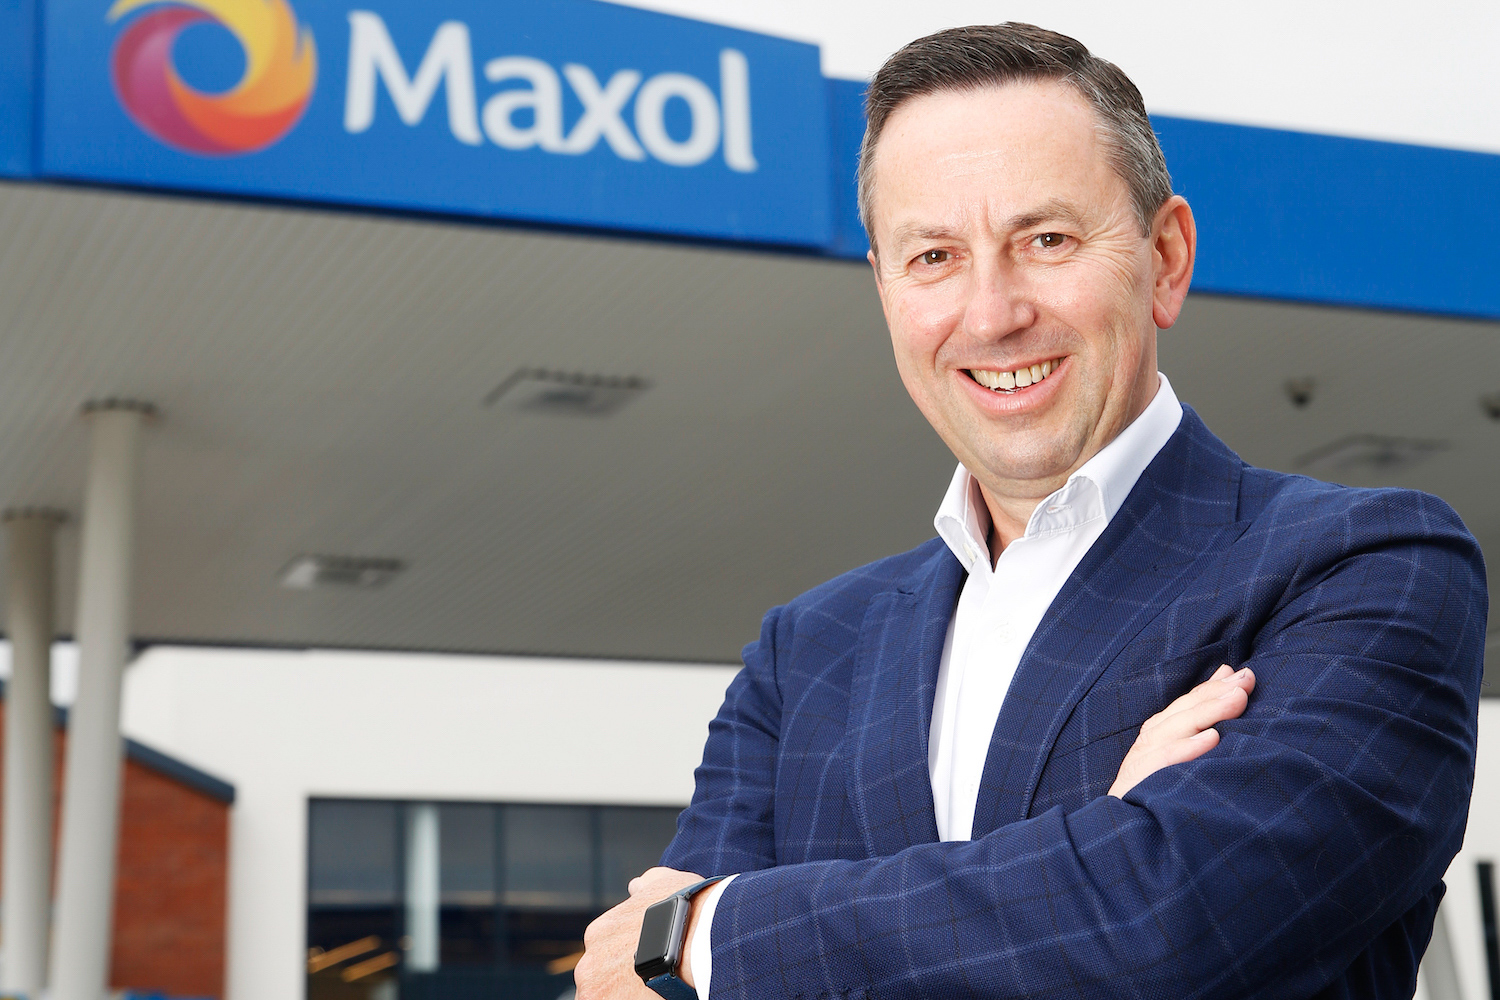 Car Industry News | Maxol to invest millions in Irish forecourt operations | CompleteCar.ie